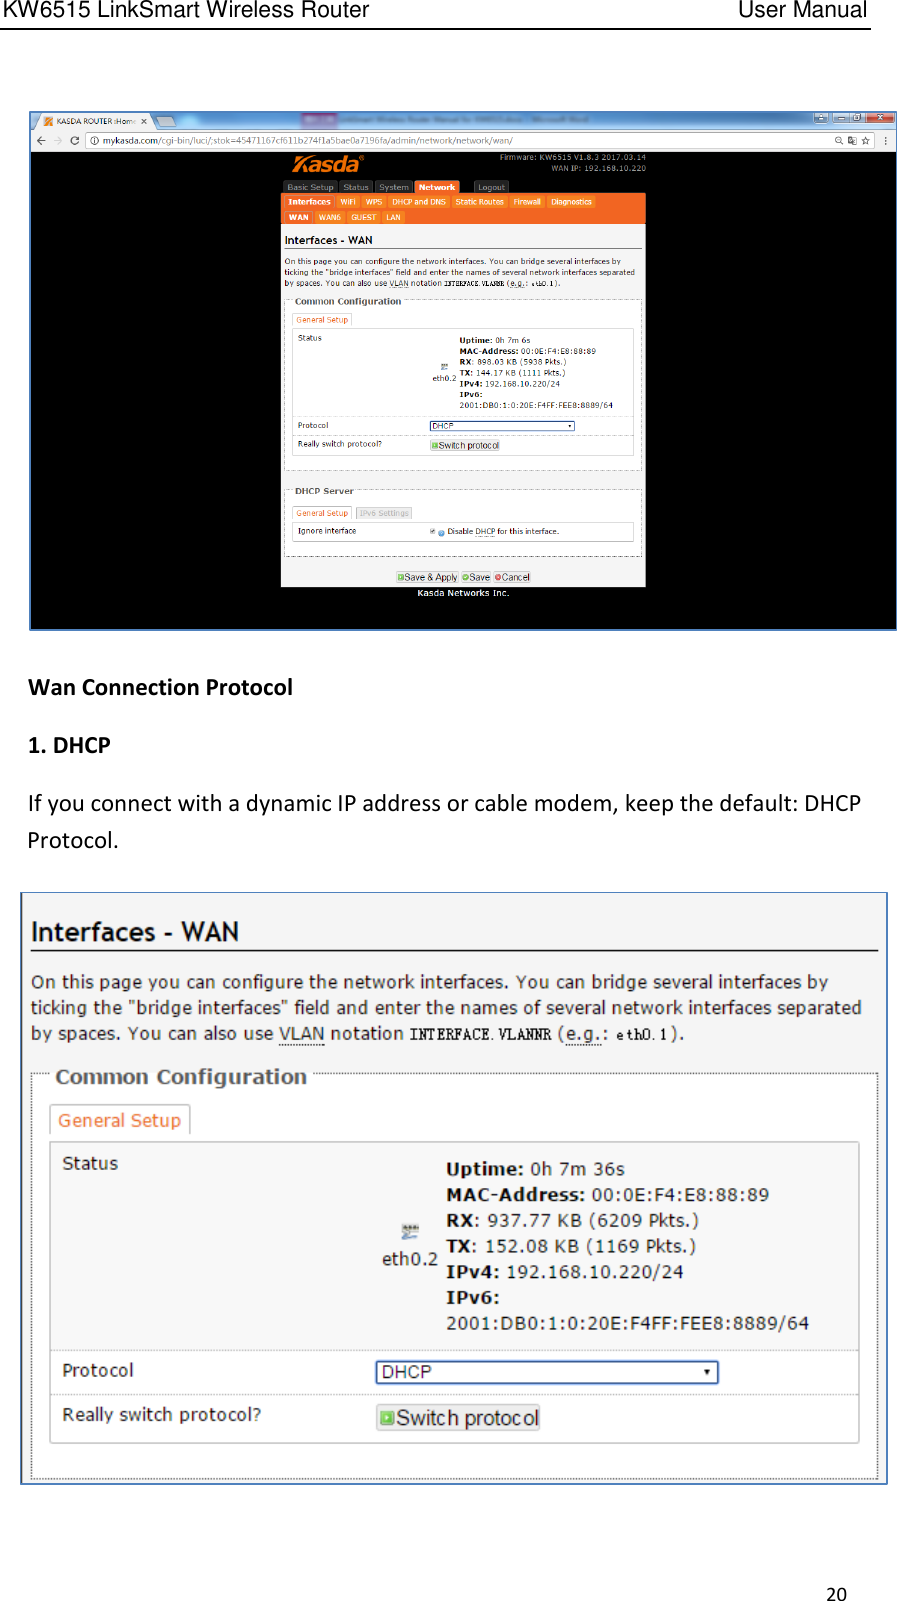 KW6515 LinkSmart Wireless Router         User Manual 20      Wan Connection Protocol   1. DHCP   If you connect with a dynamic IP address or cable modem, keep the default: DHCP Protocol.  